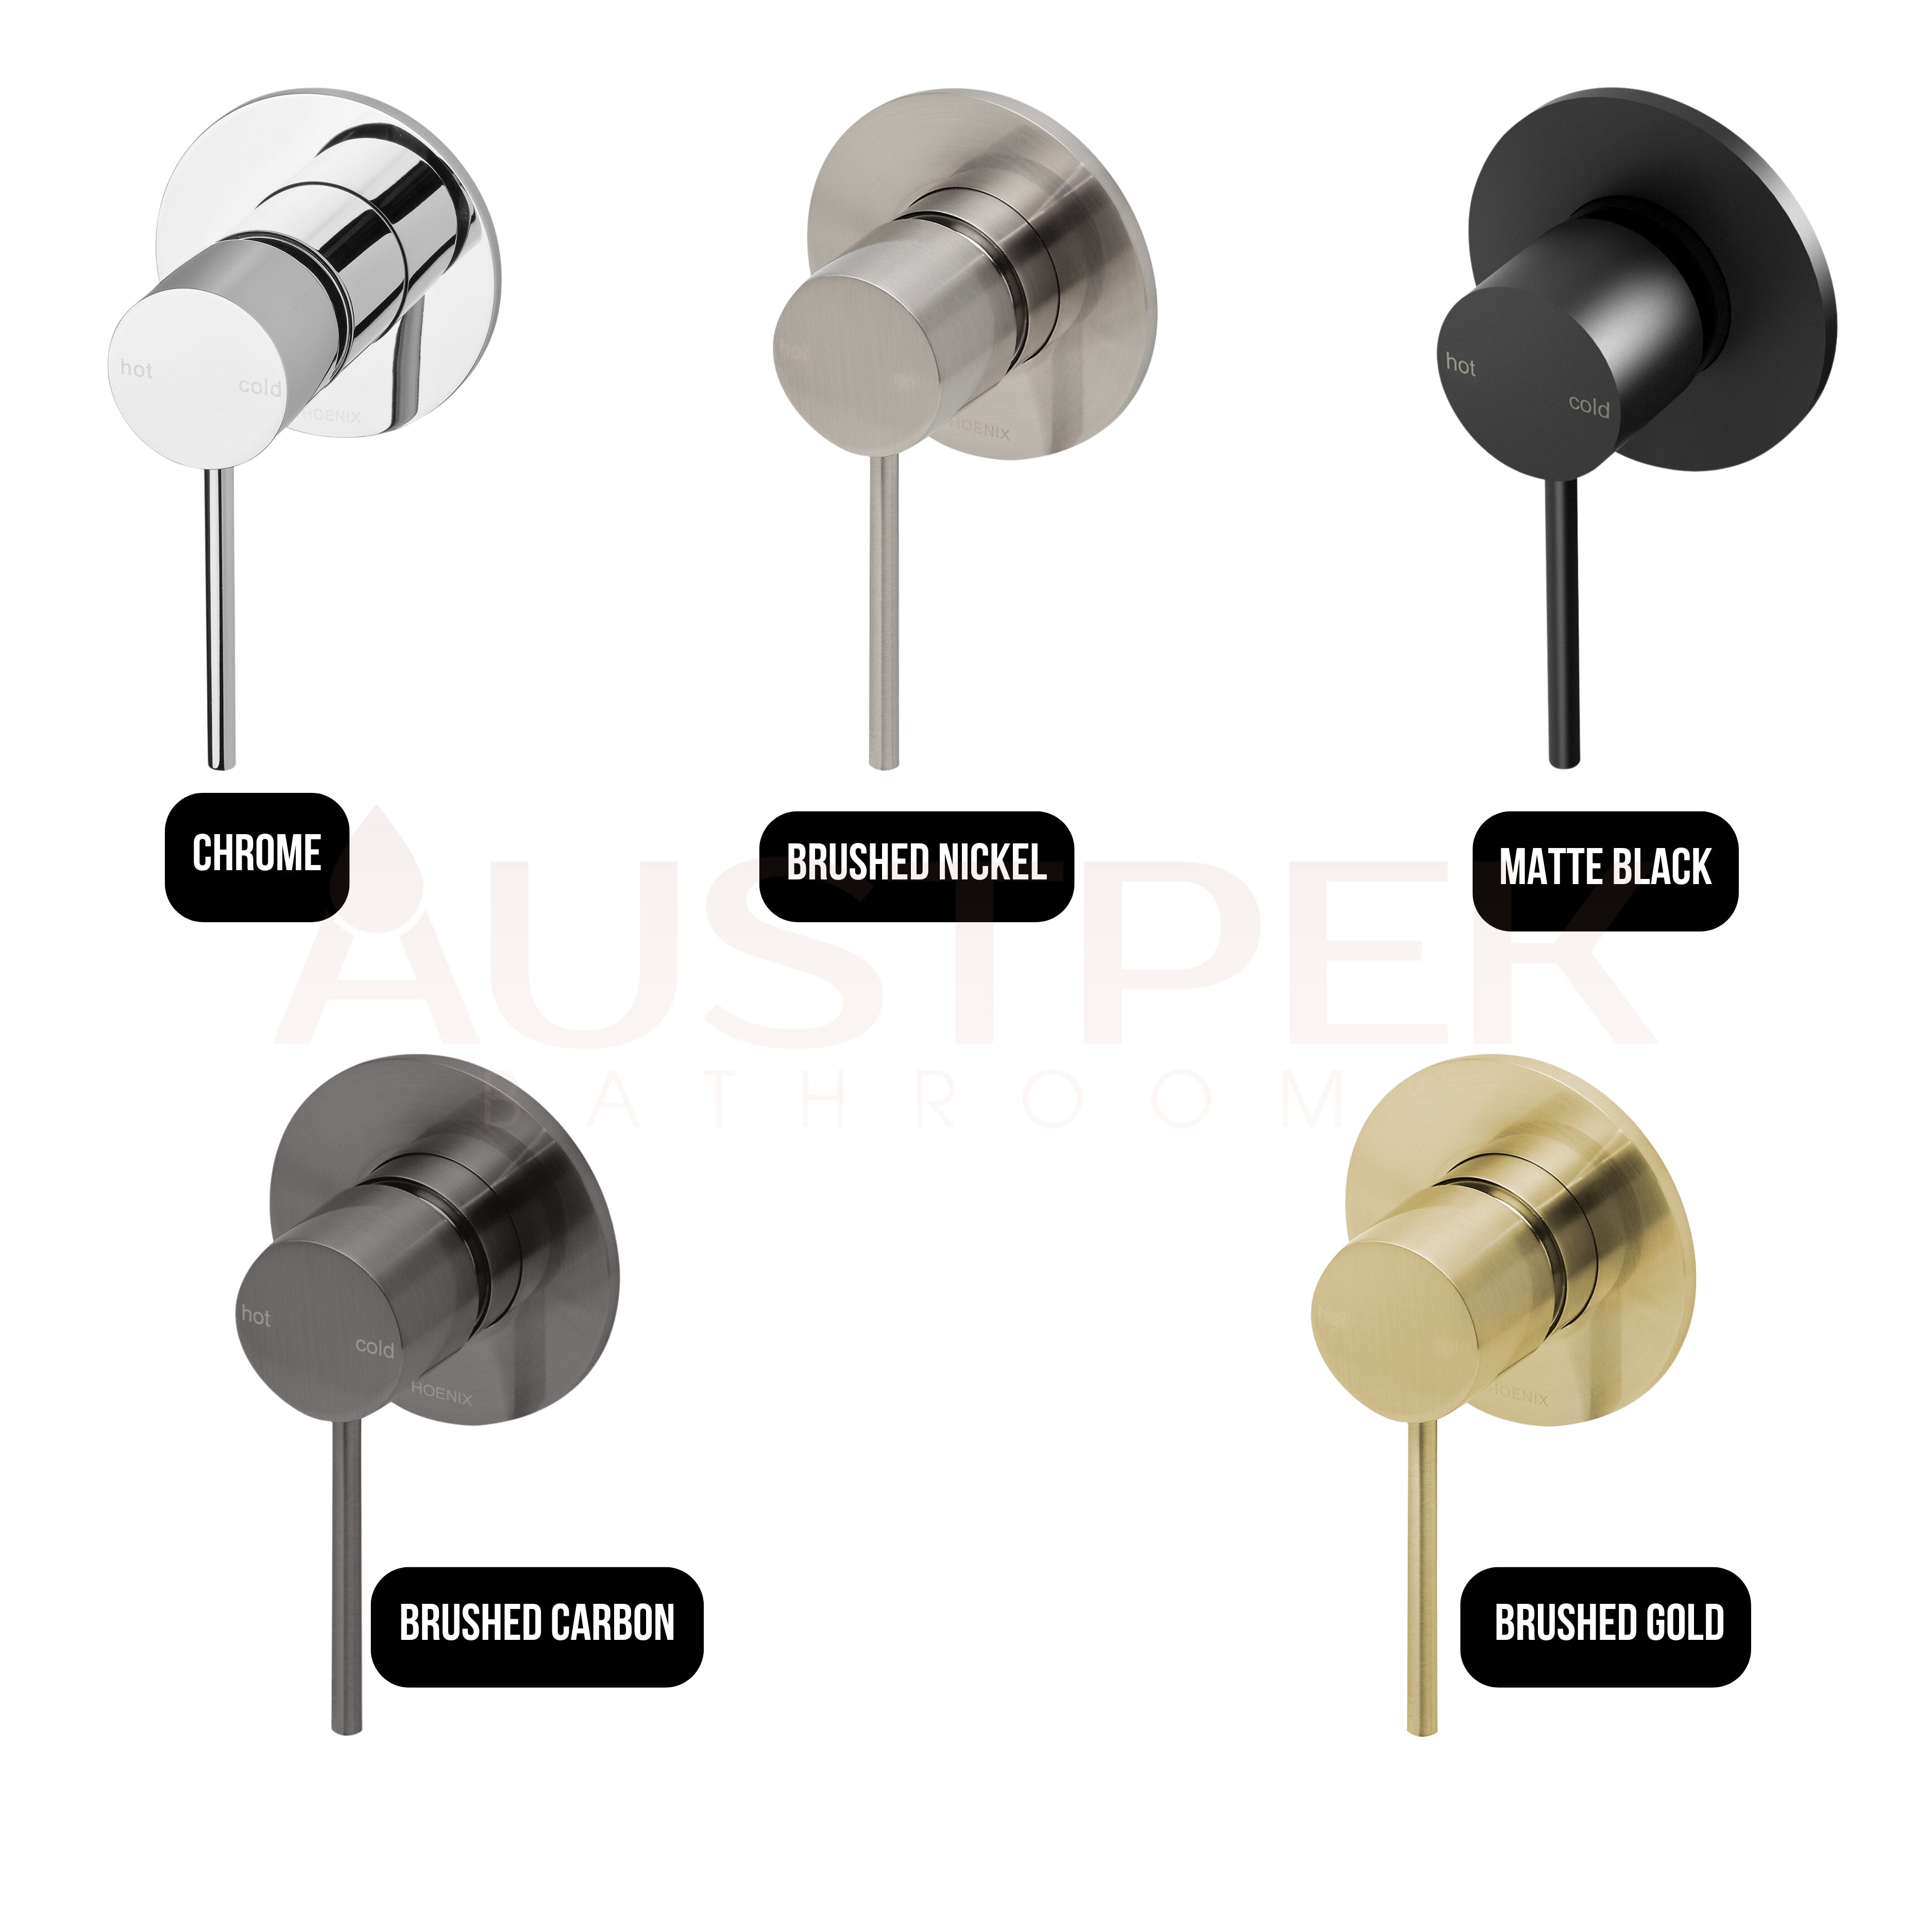 PHOENIX VIVID SLIMLINE SWITCHMIX SHOWER / WALL MIXER FIT-OFF AND ROUGH-IN KIT BRUSHED CARBON